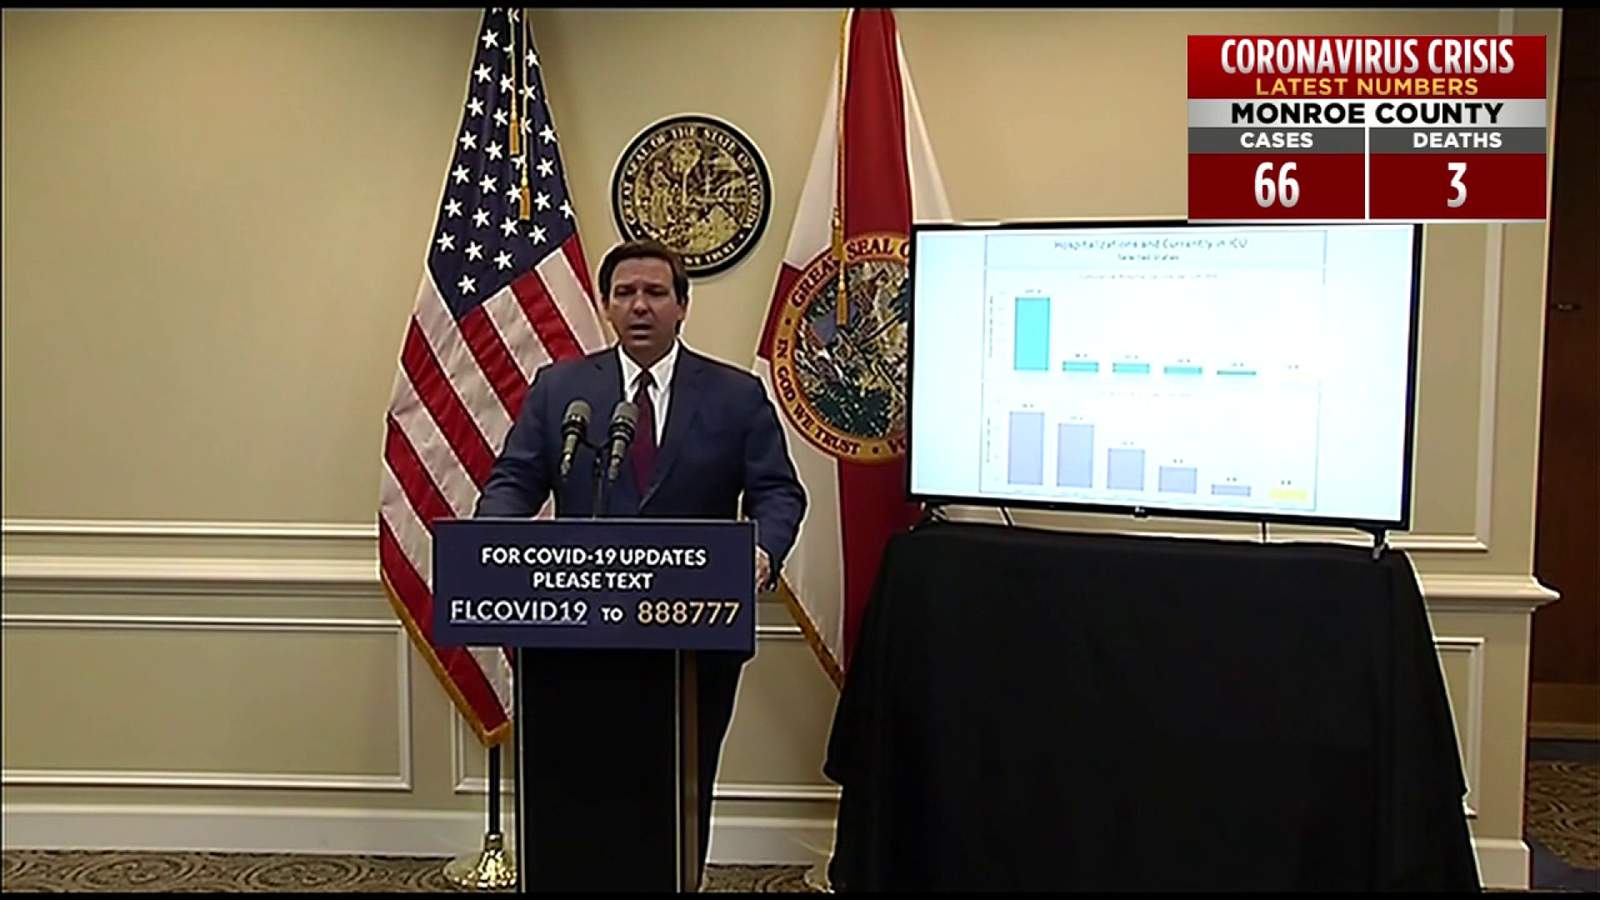 DeSantis to form new task force to plan re-opening businesses amid coronavirus pandemic